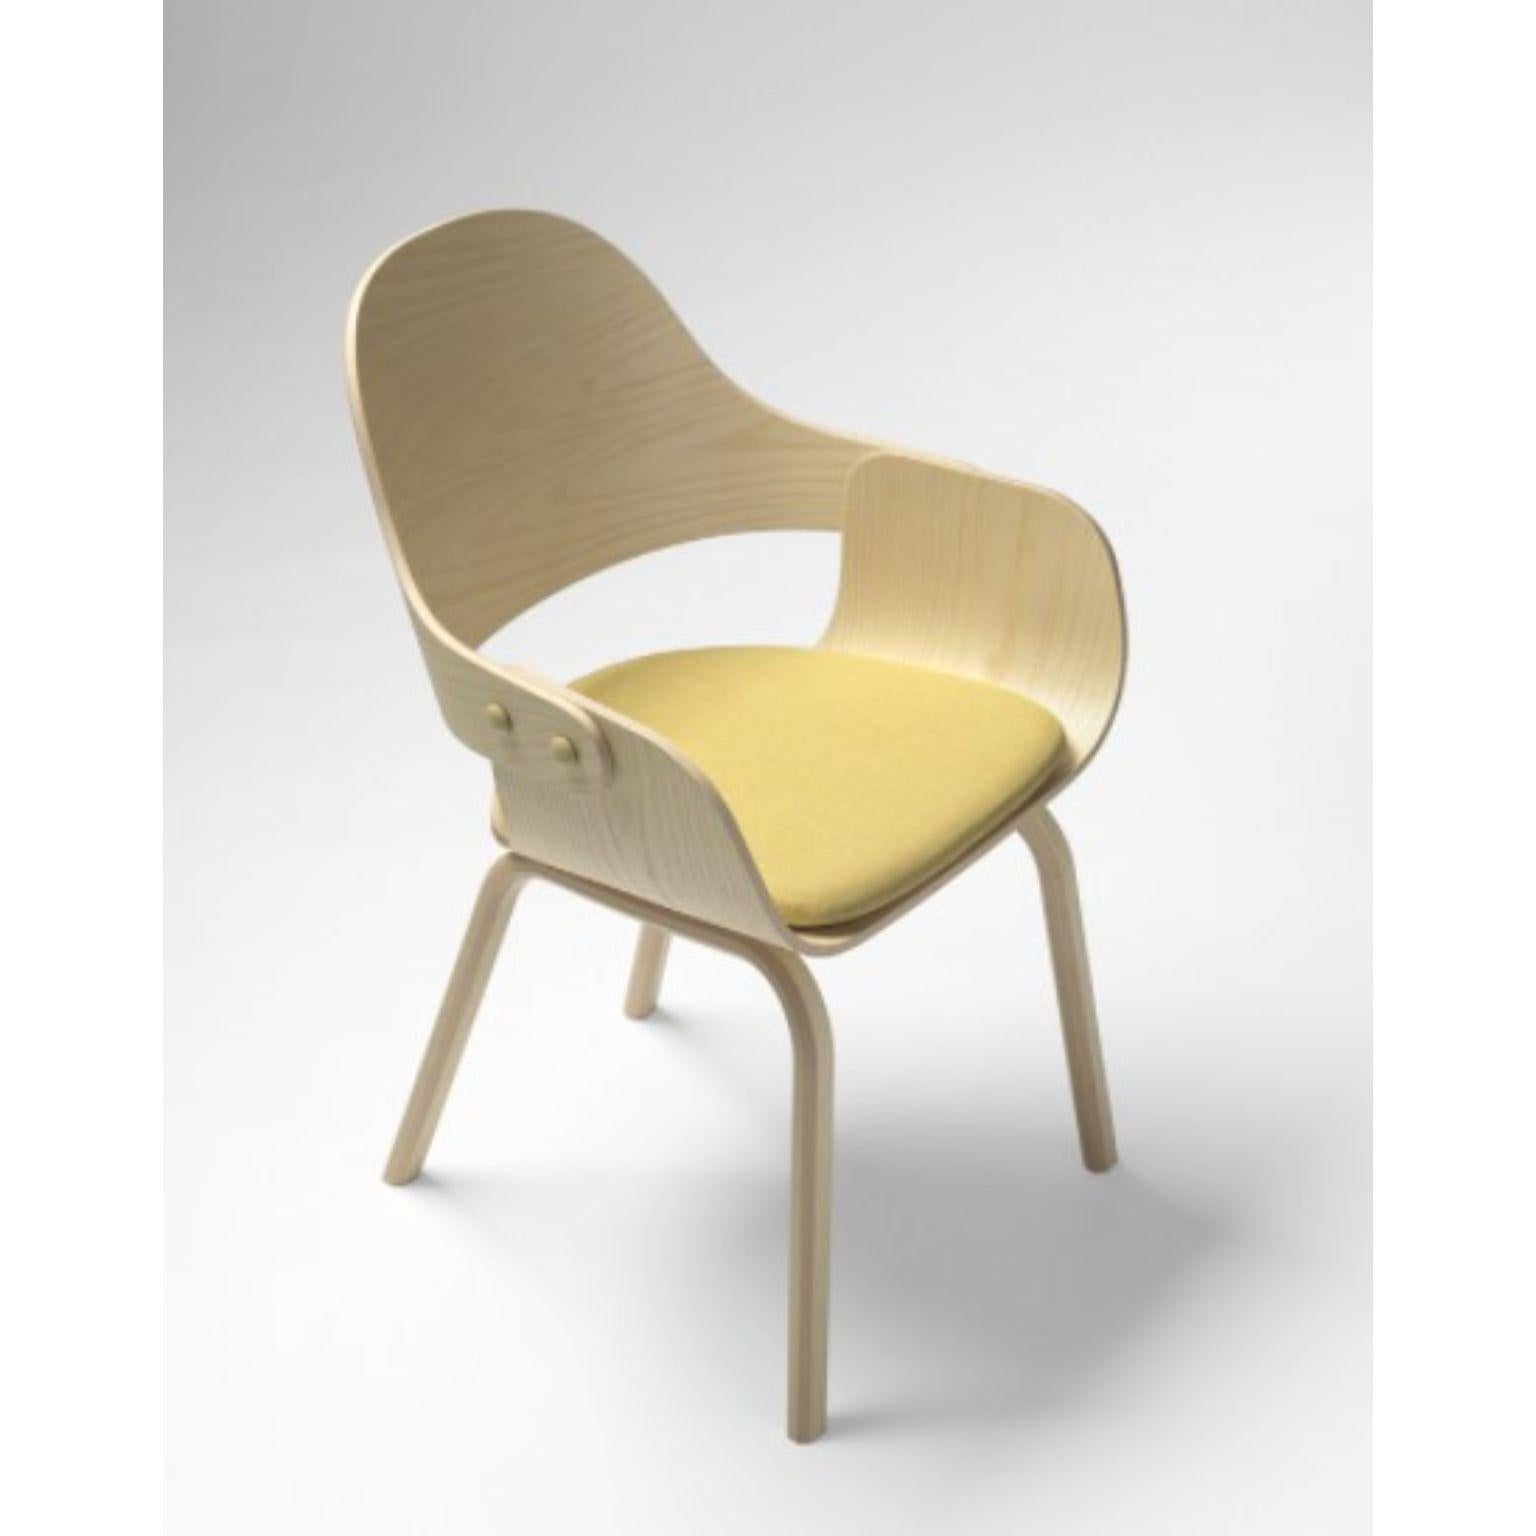 Wooden legs showtime nude beige by Jaime Hayon 
Dimensions: D 55 x W 55 x H 86 cm 
Materials:Legs, seat, and backrest in plywood with exteriors in natural ash, walnut, or ash stained black. Metallic decorative buttons. Seat cushion, interior seat